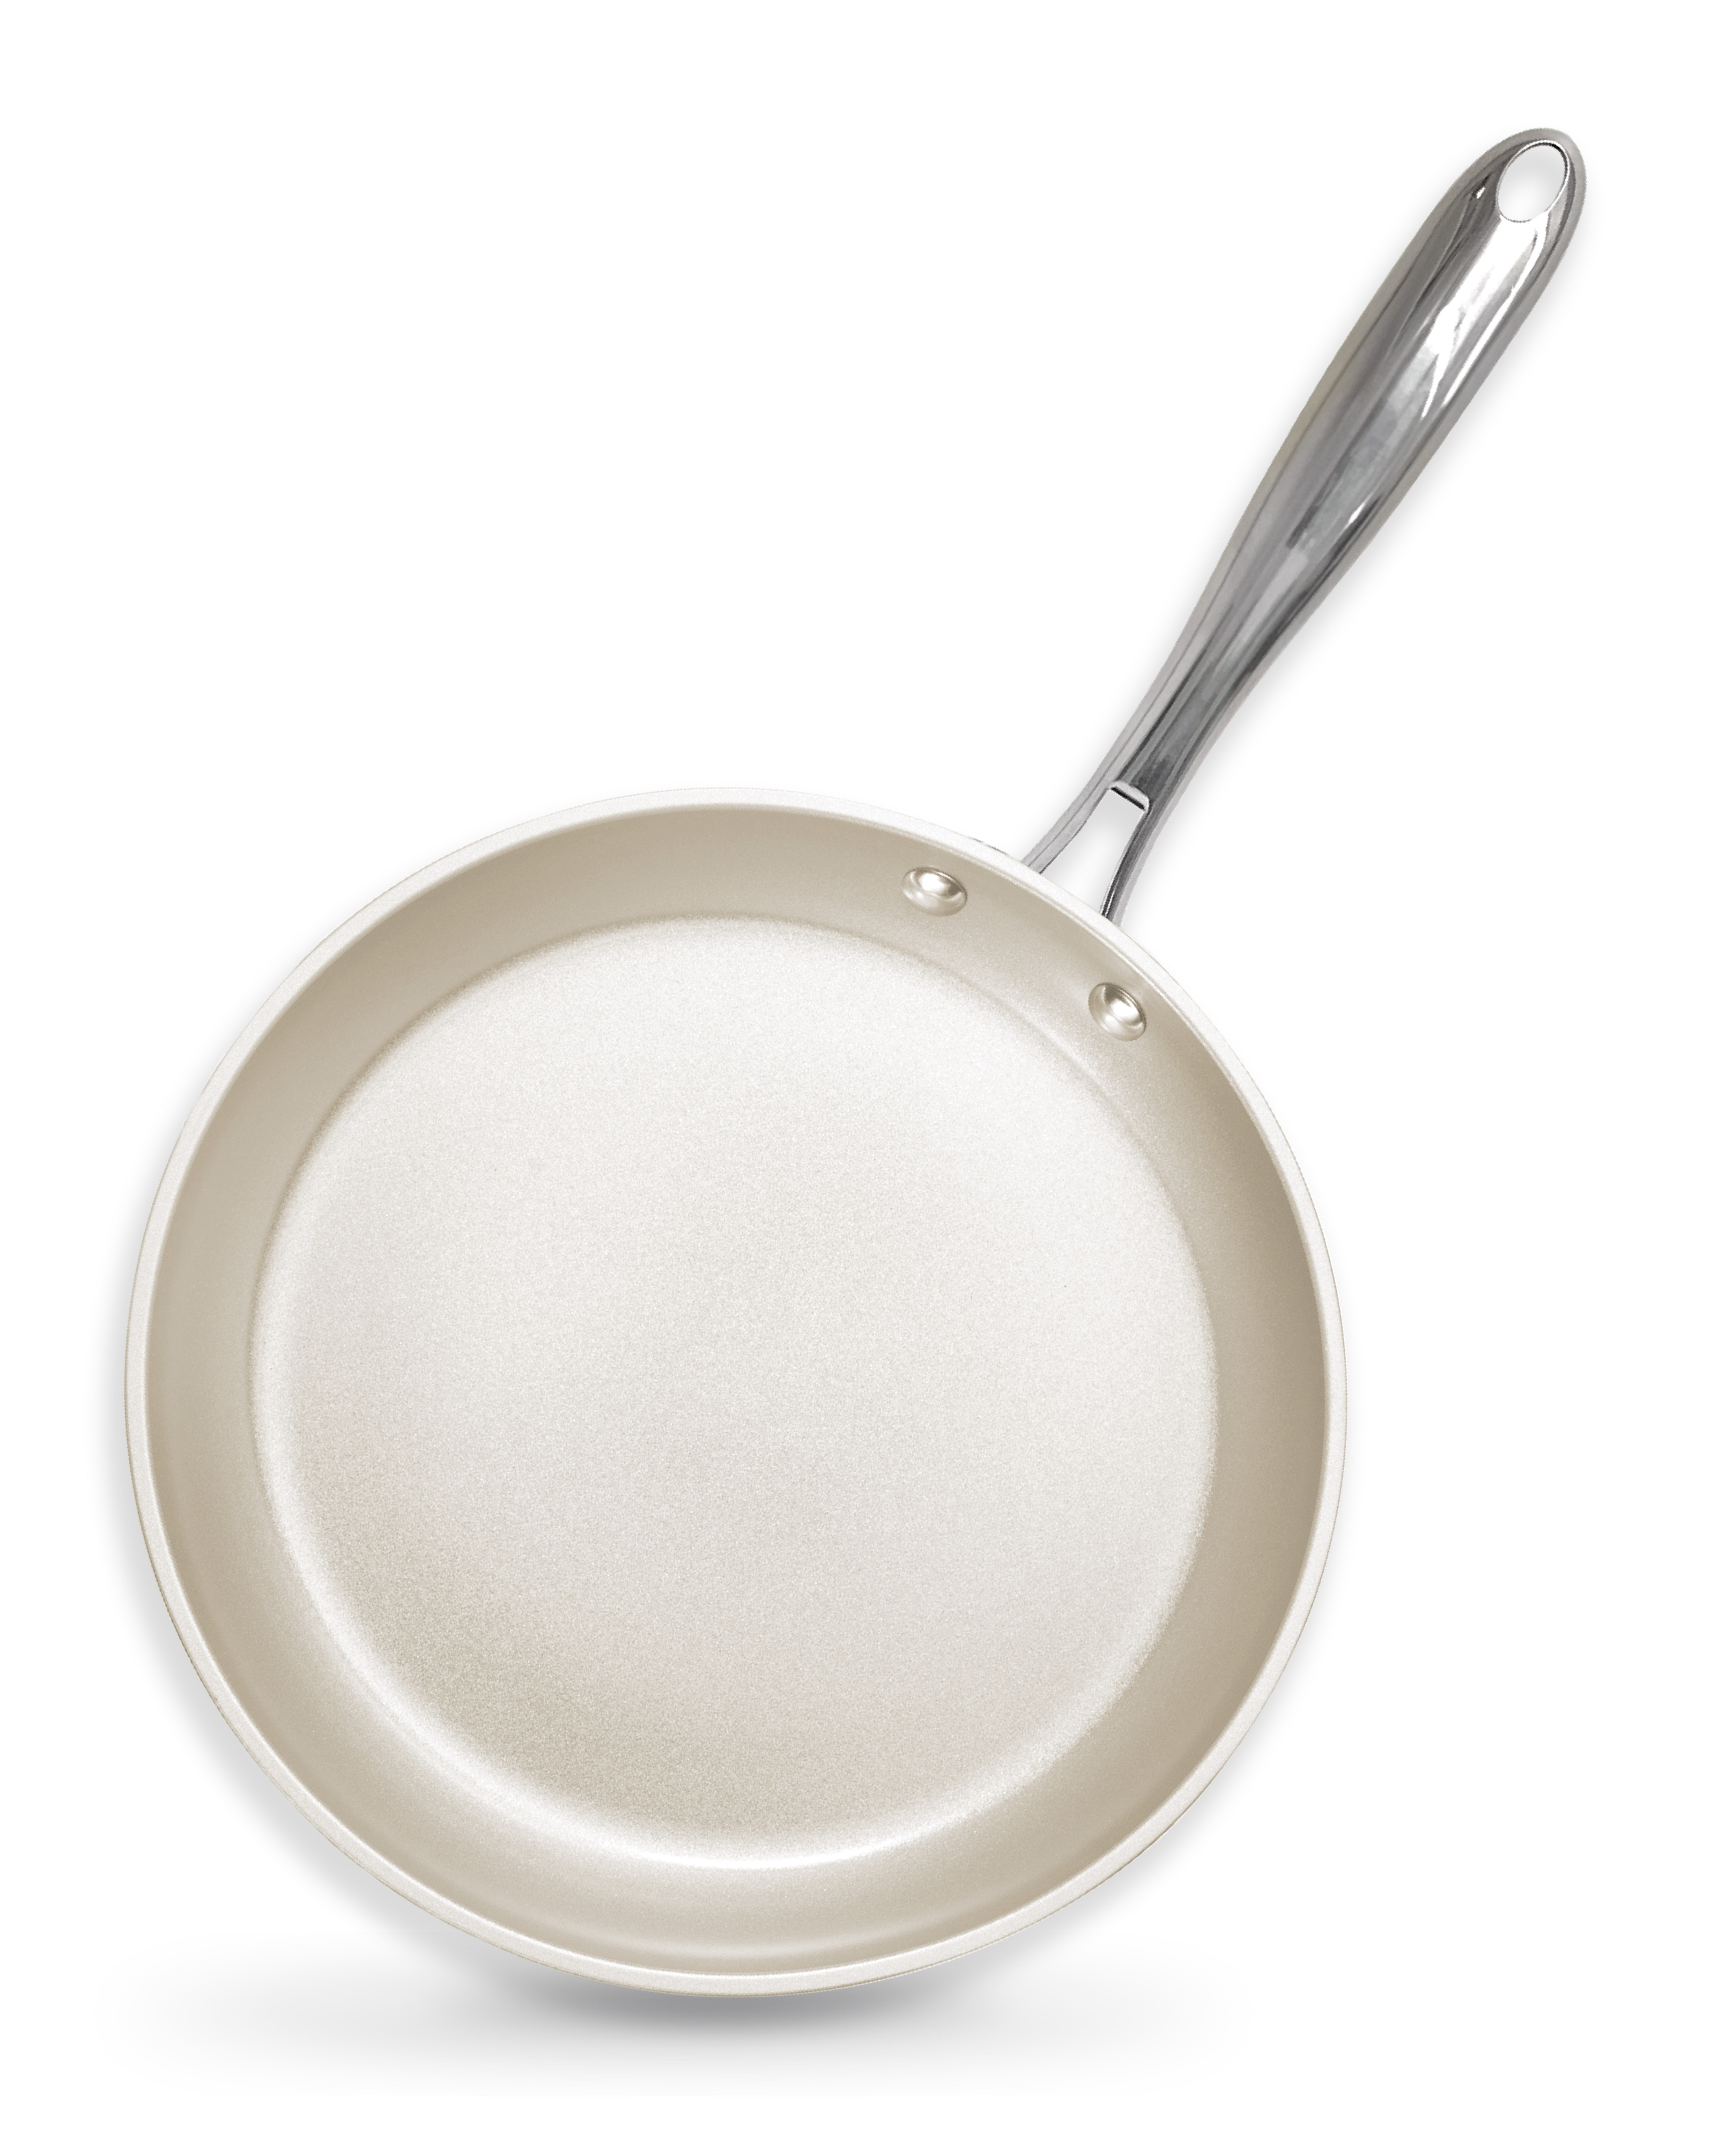 Gotham Steel Hammered Design Fry Pan, with Lid, Non-Stick, Aluminum, 10  Inch